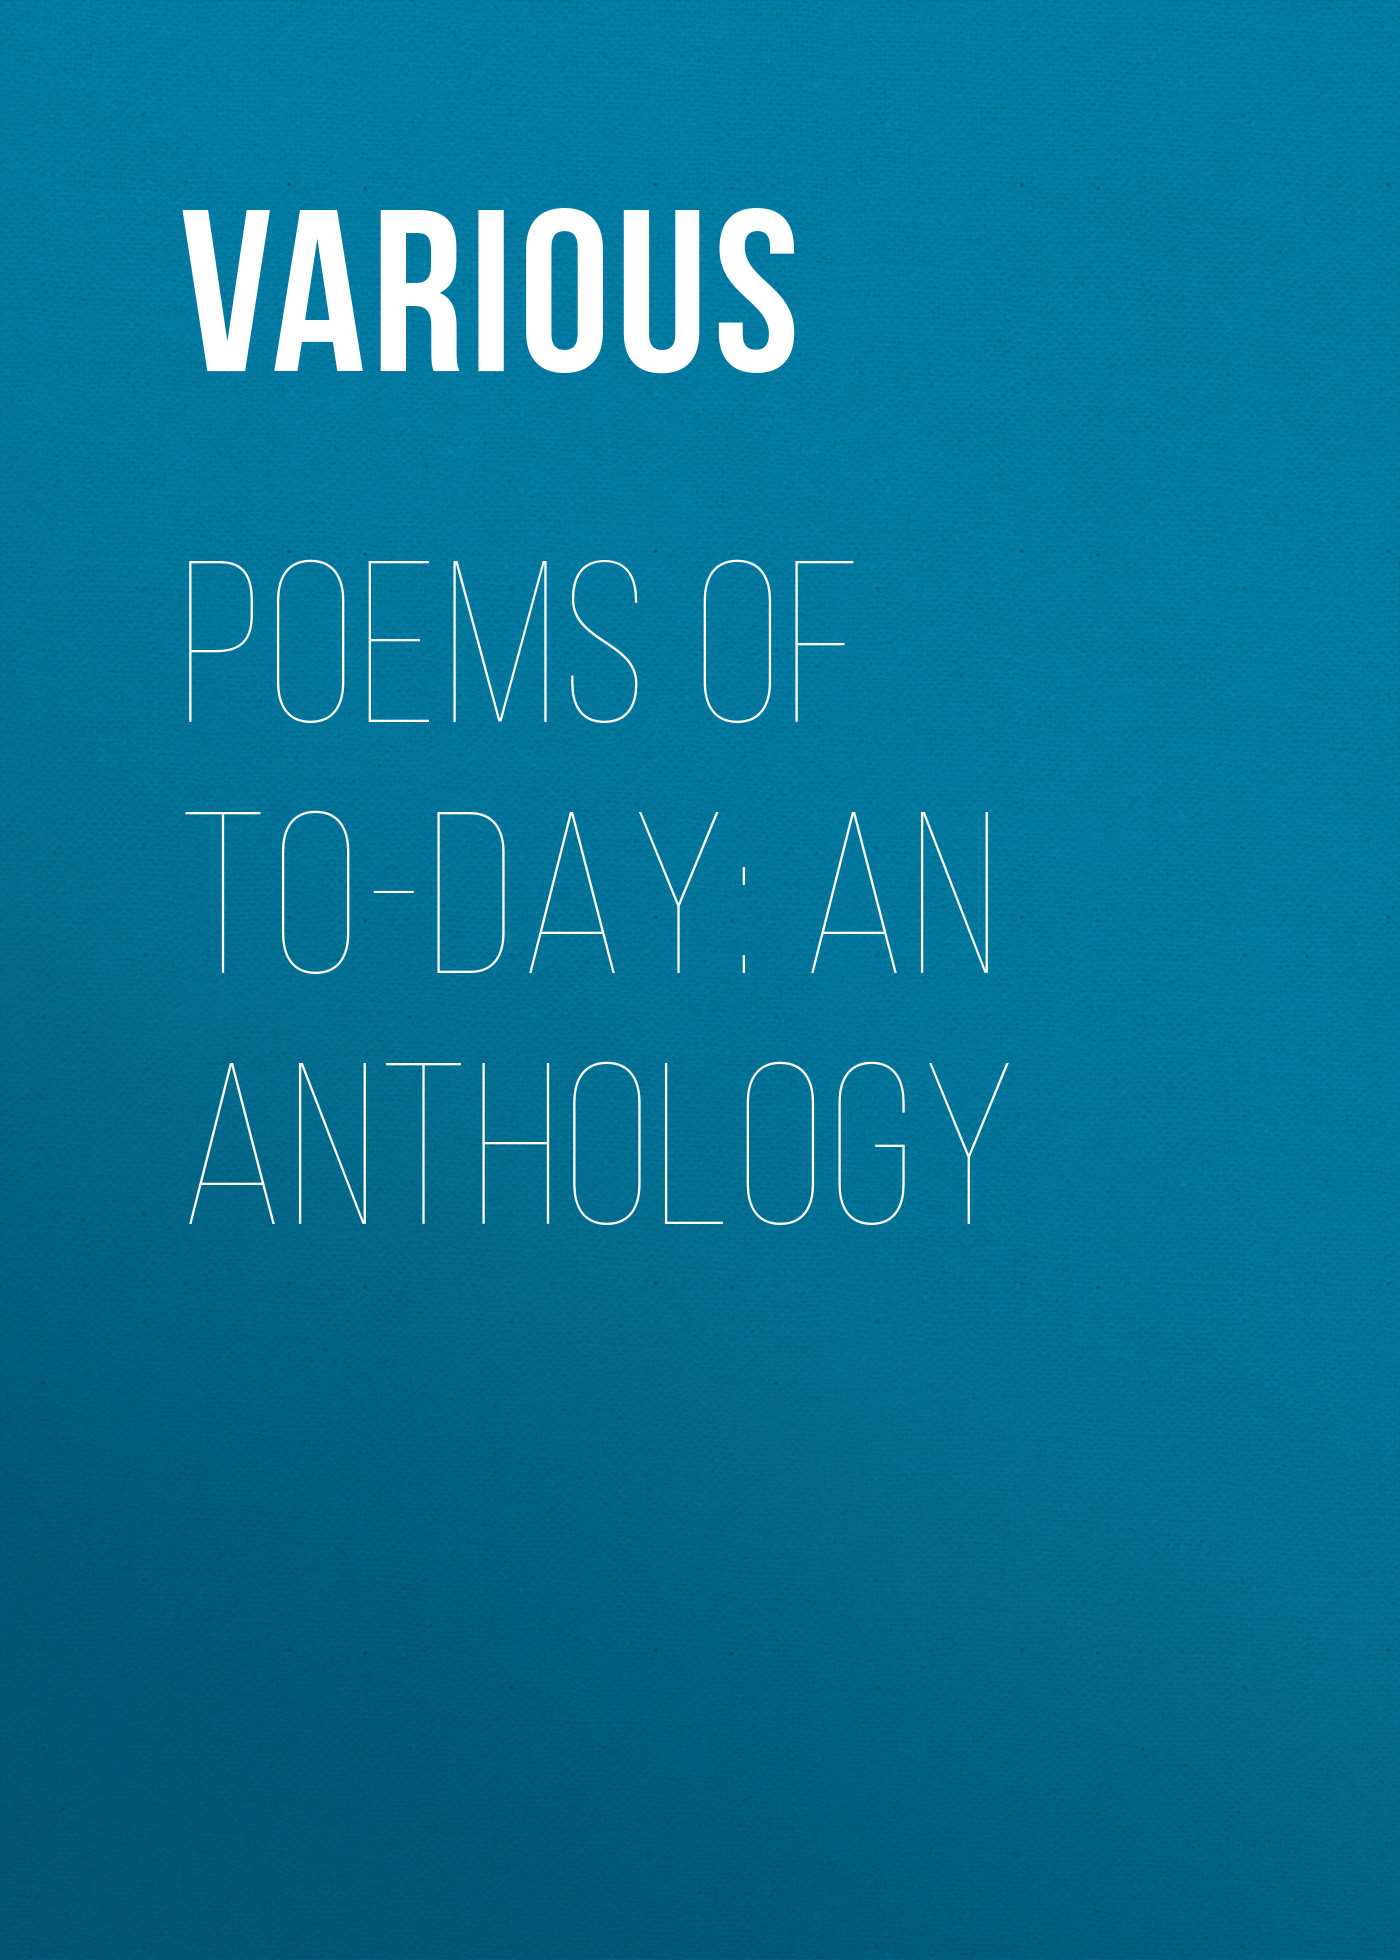 Poems of To-Day: an Anthology